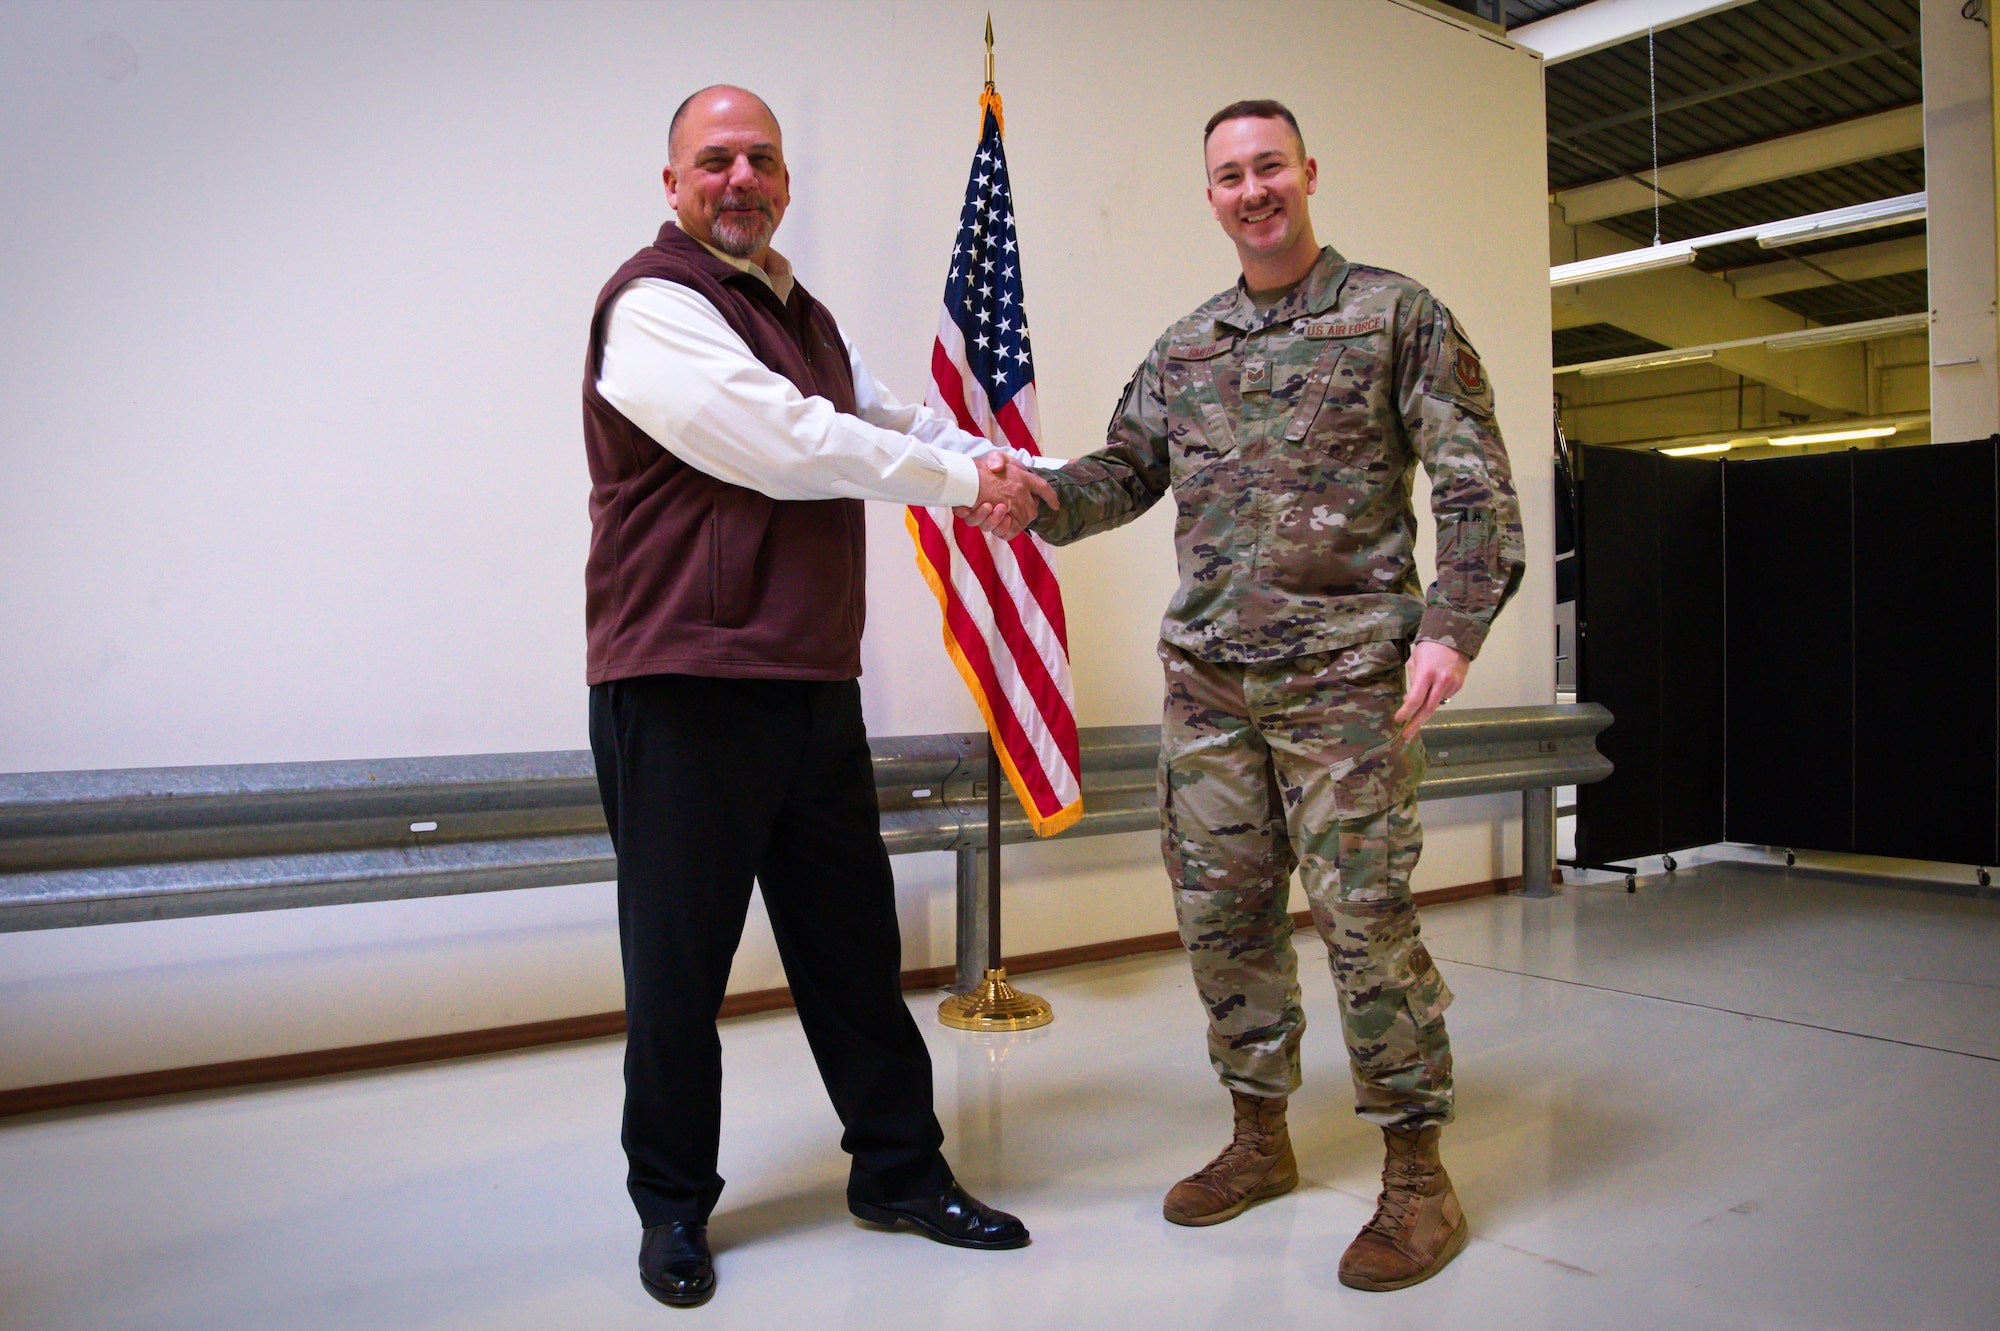 Scott Lockard, 86th Airlift Wing vice director, recognizes U.S. Air Force Staff Sgt. David Smith, 786th Civil Engineer Squadron emergency management craftsman, as Airlifter of the Week at Ramstein Air Base, Germany, Nov. 10, 2021. Smith contributed to OAW where he led 441 members, resulting in 554 tents being deployed, 1.5 million meals served, $168 million in assets utilized and 35 thousand travelers granted safe passage. (U.S. Air Force photo by Senior Airman Branden Rae)